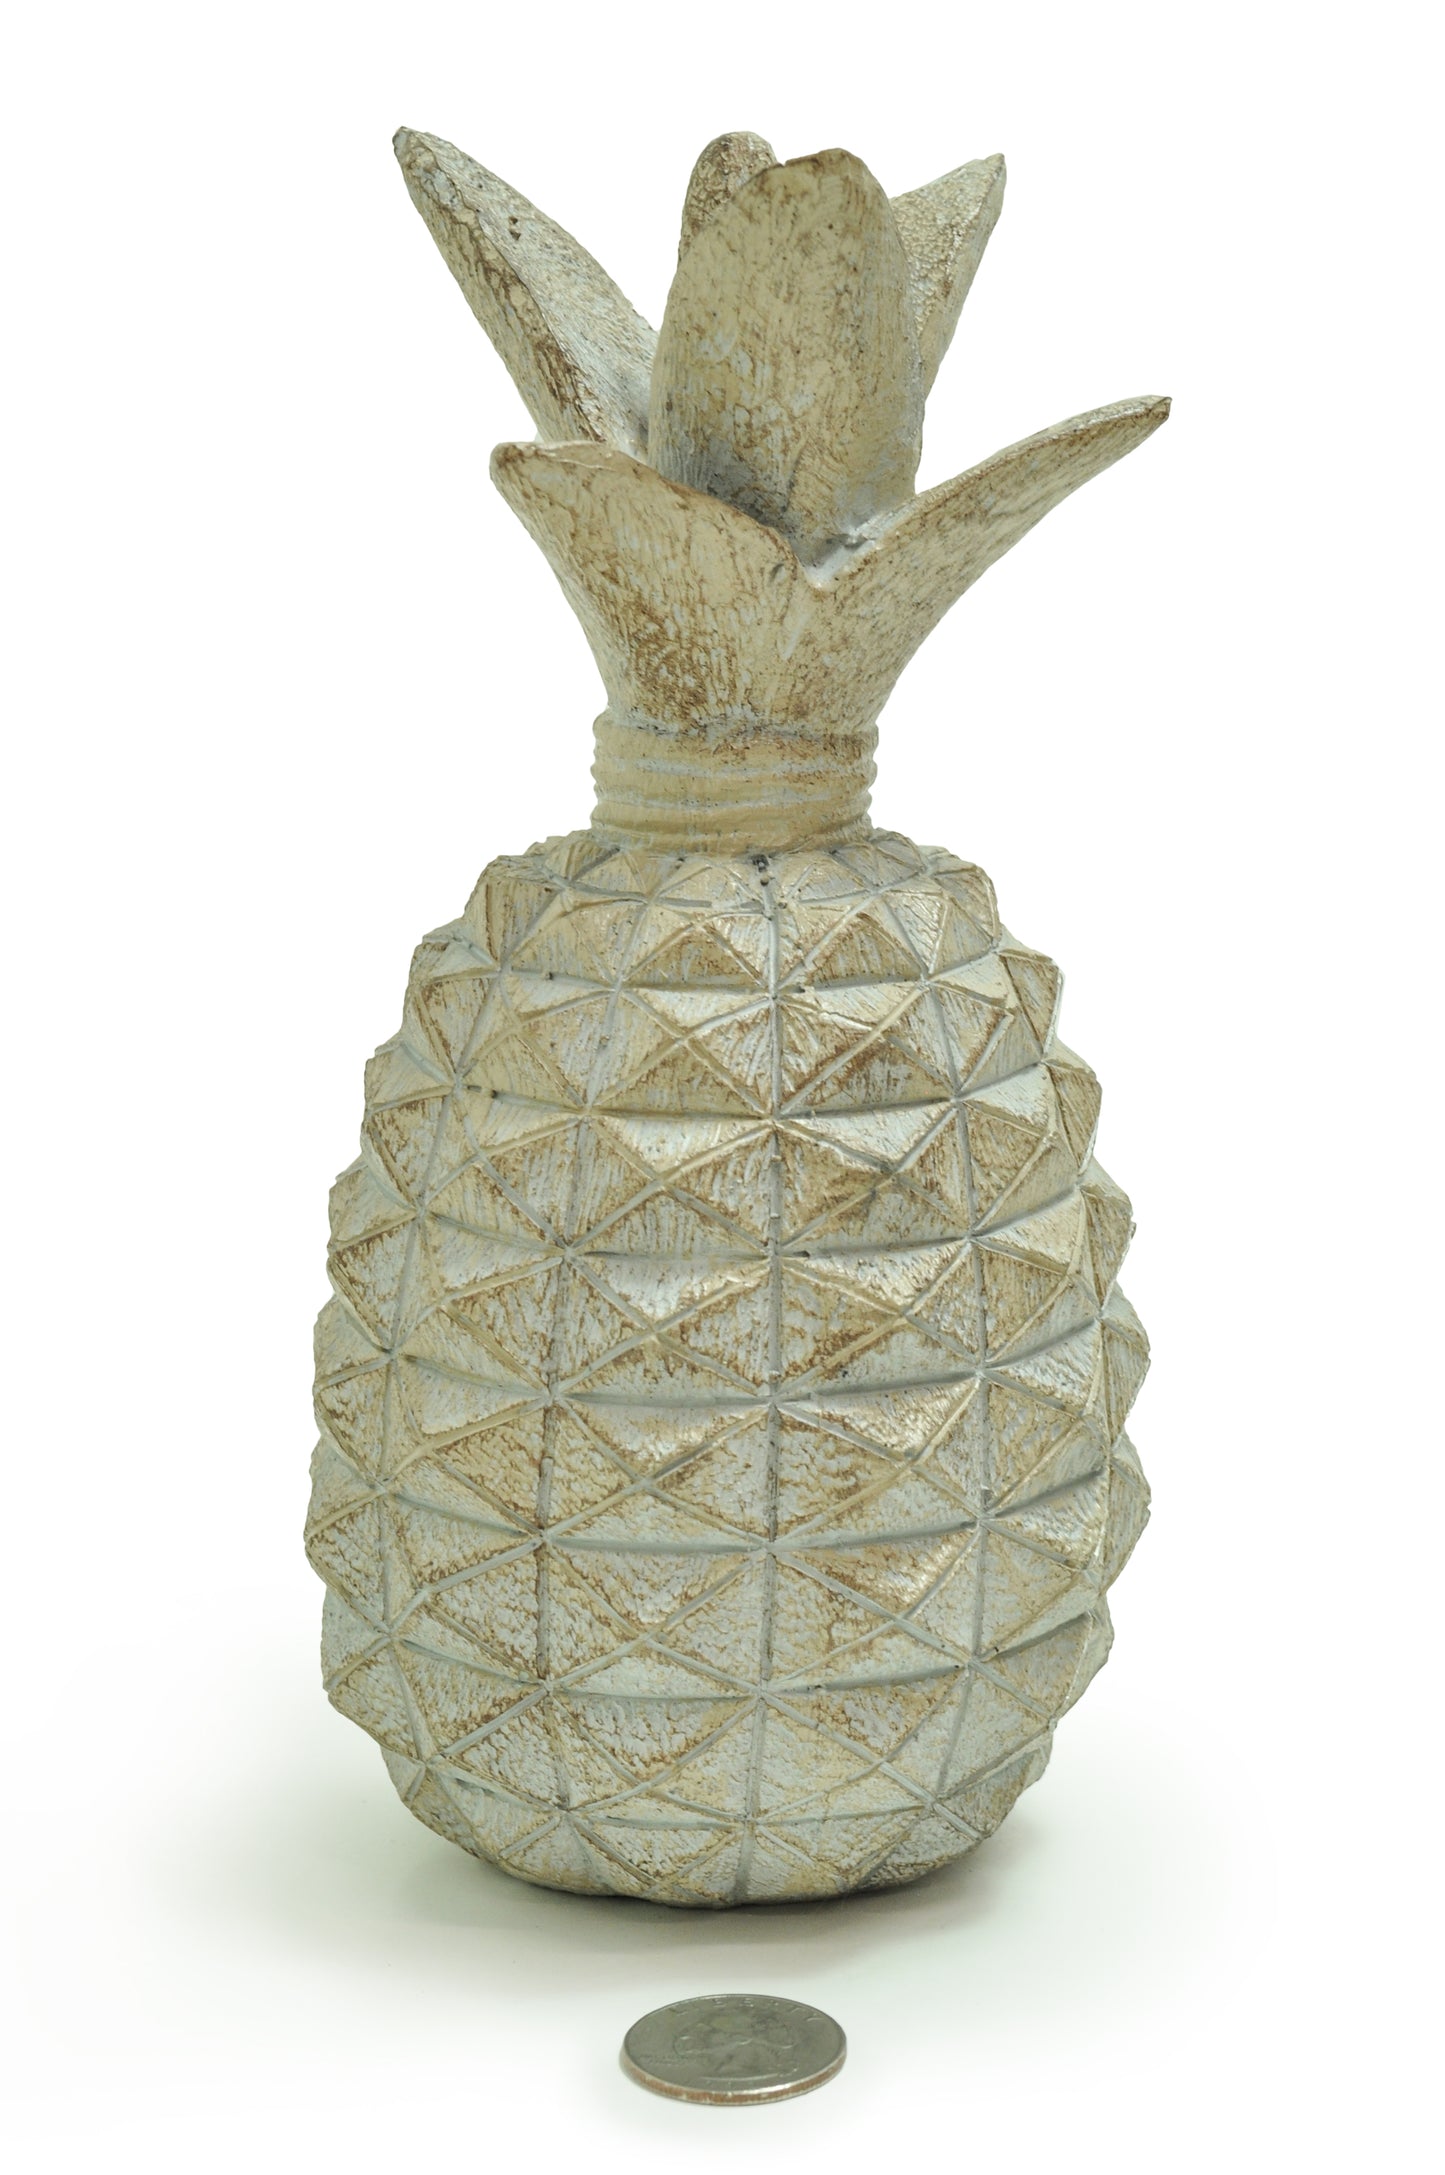 Pine Apple Stone Garden Home Décor Display by Crystal Castle®